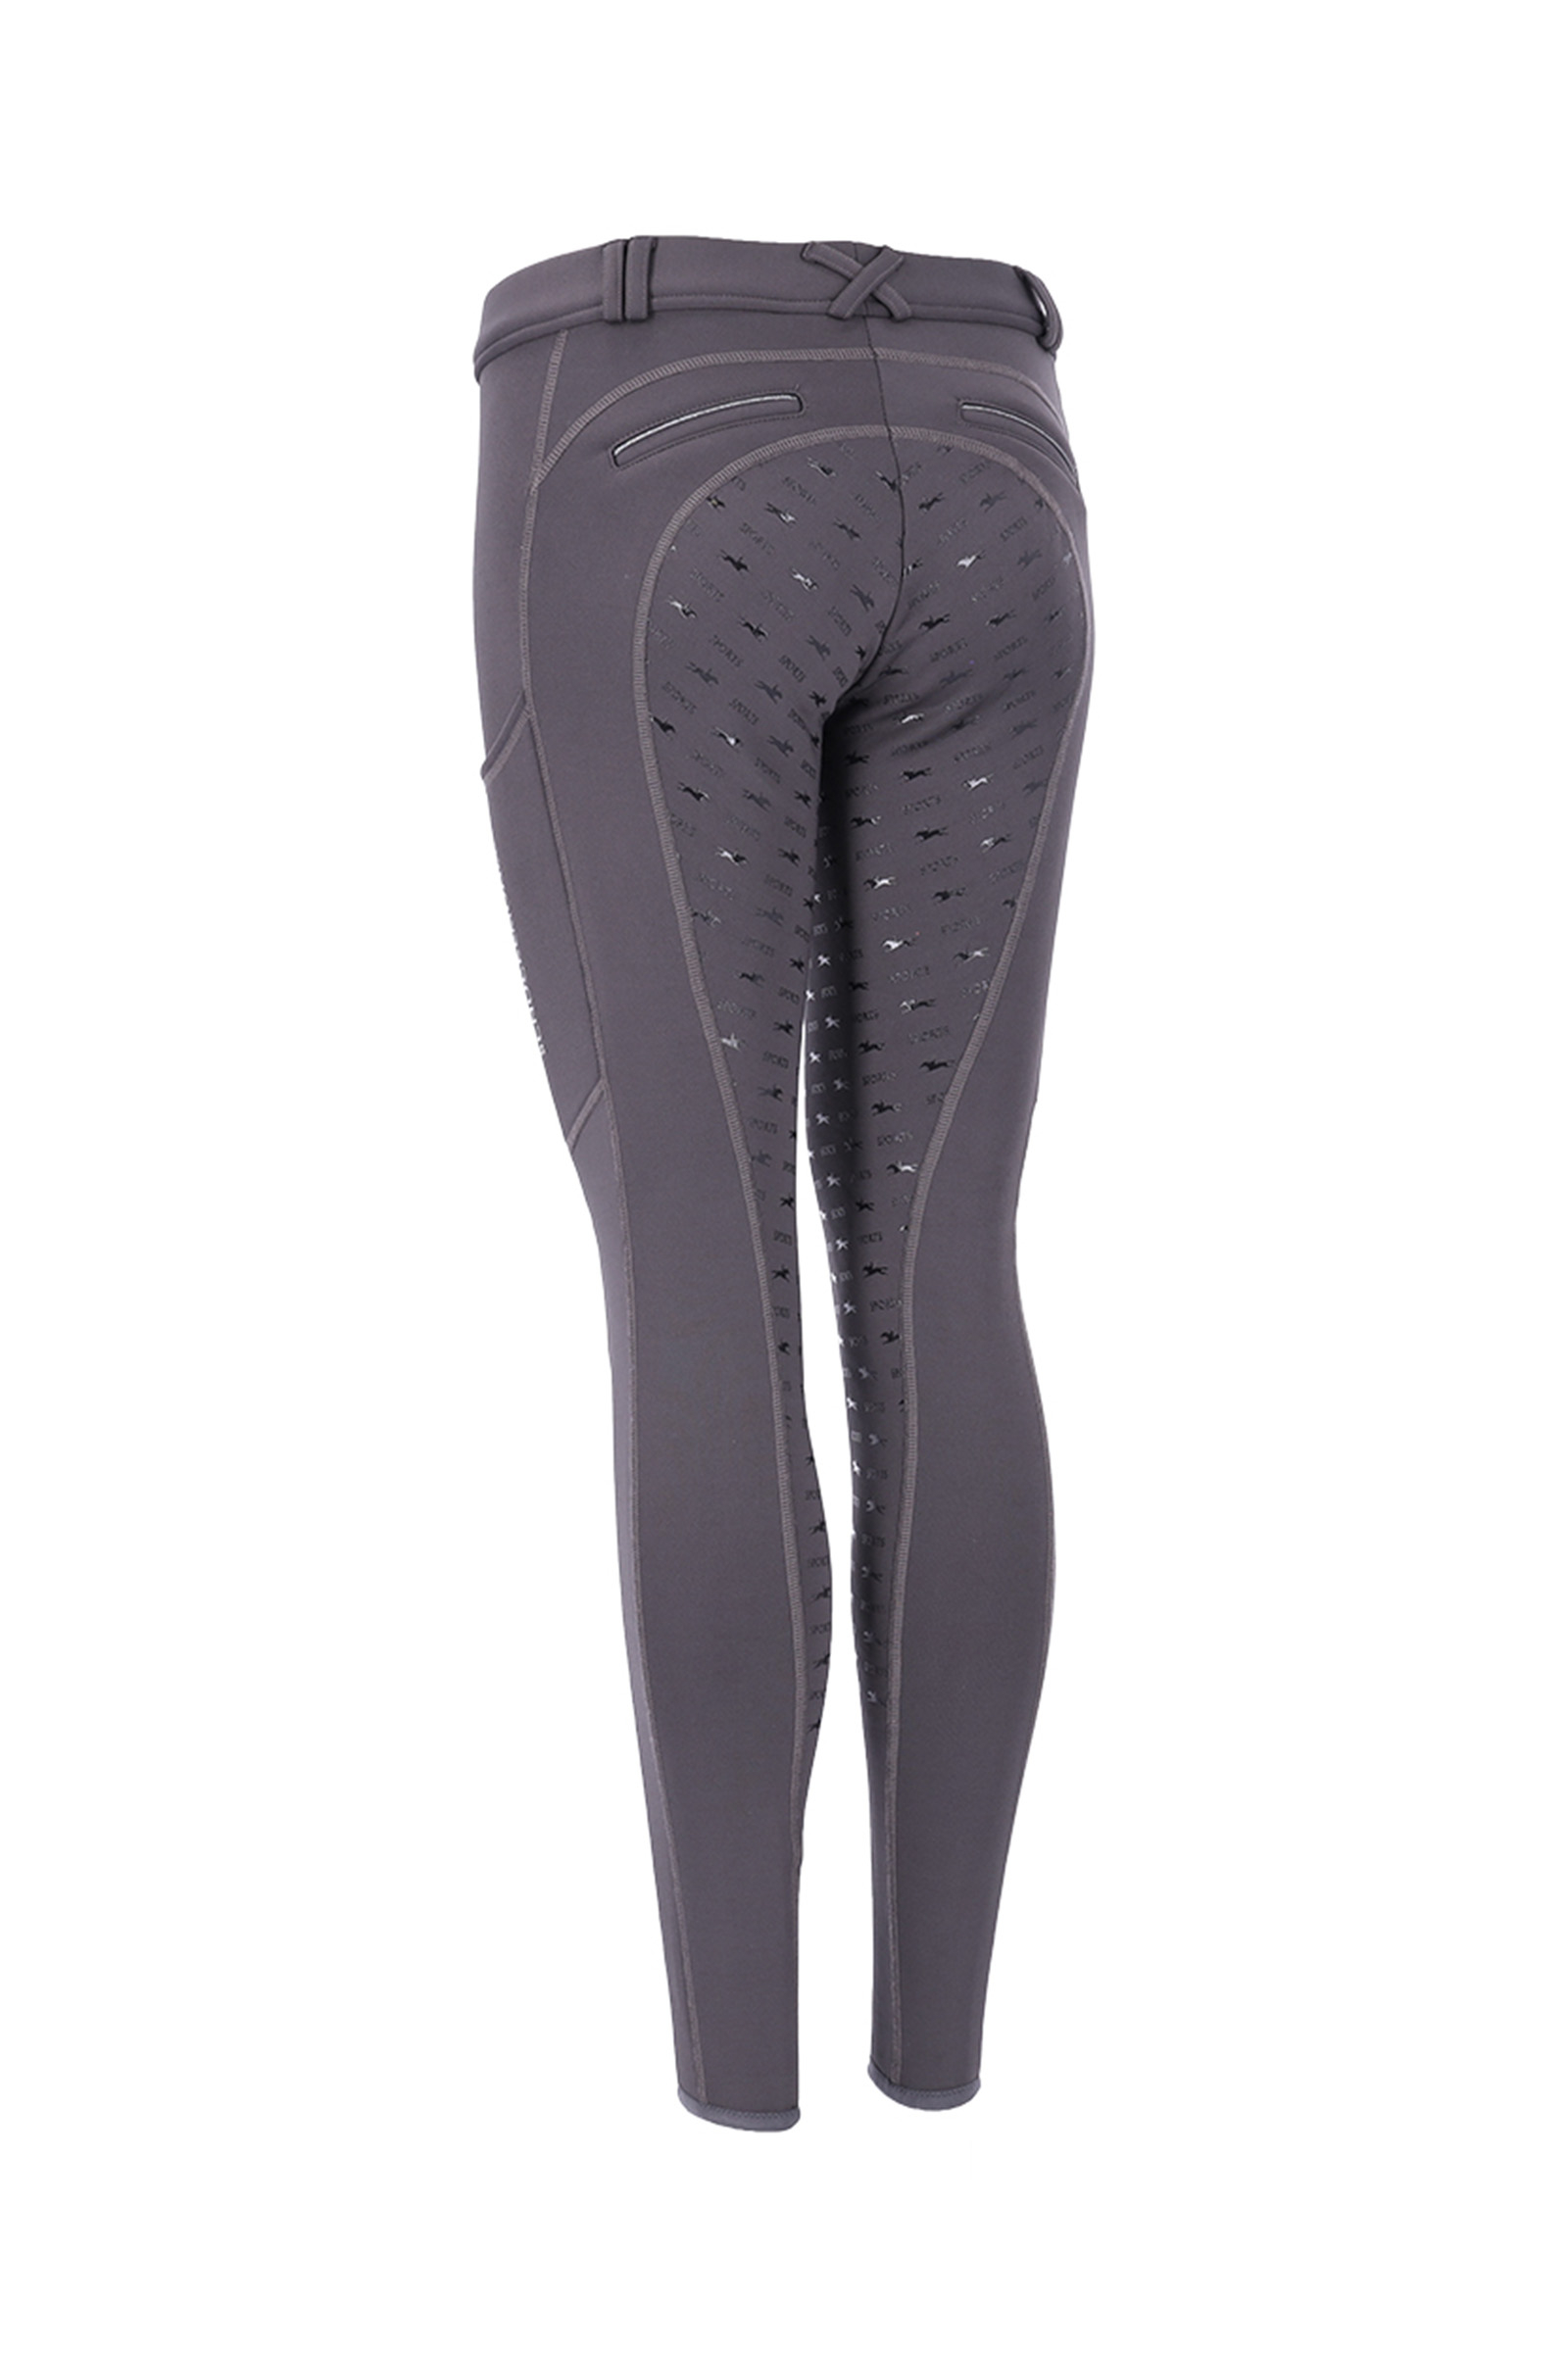 Schockemohle Pocket Riding Tights KP - The Show Trunk II